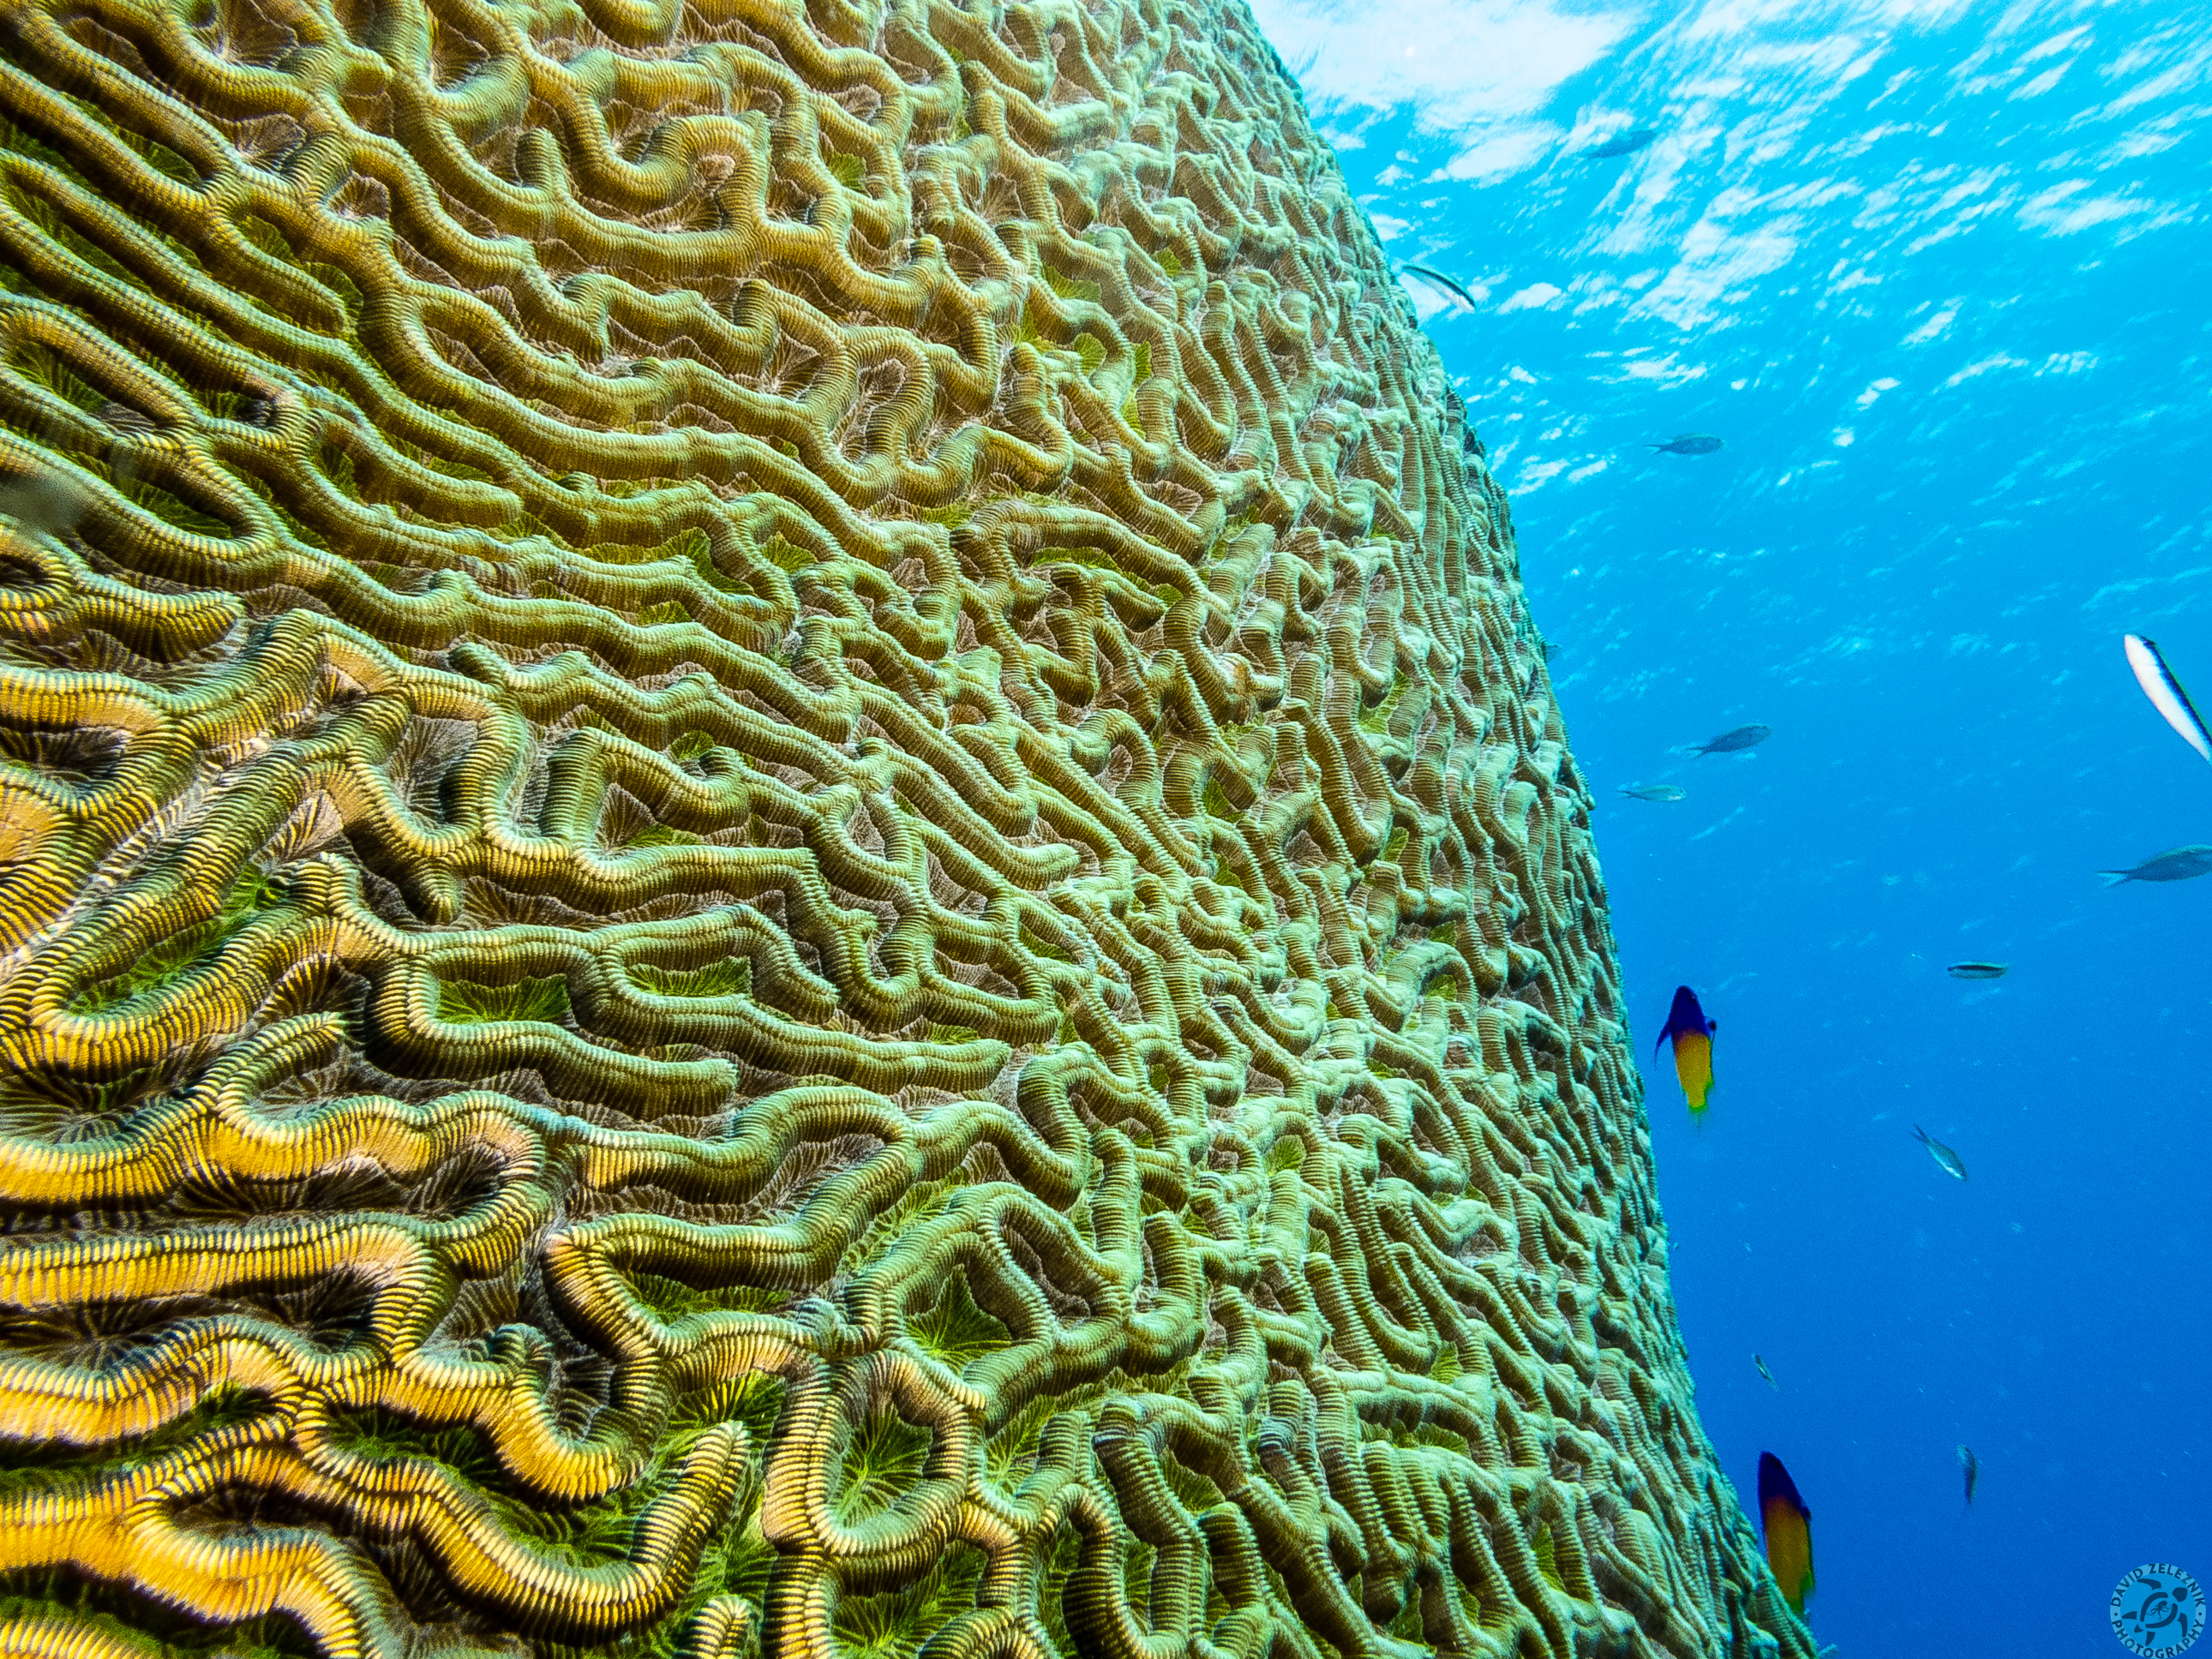 Valleys of the Moon, or rather a giant head of brain coral